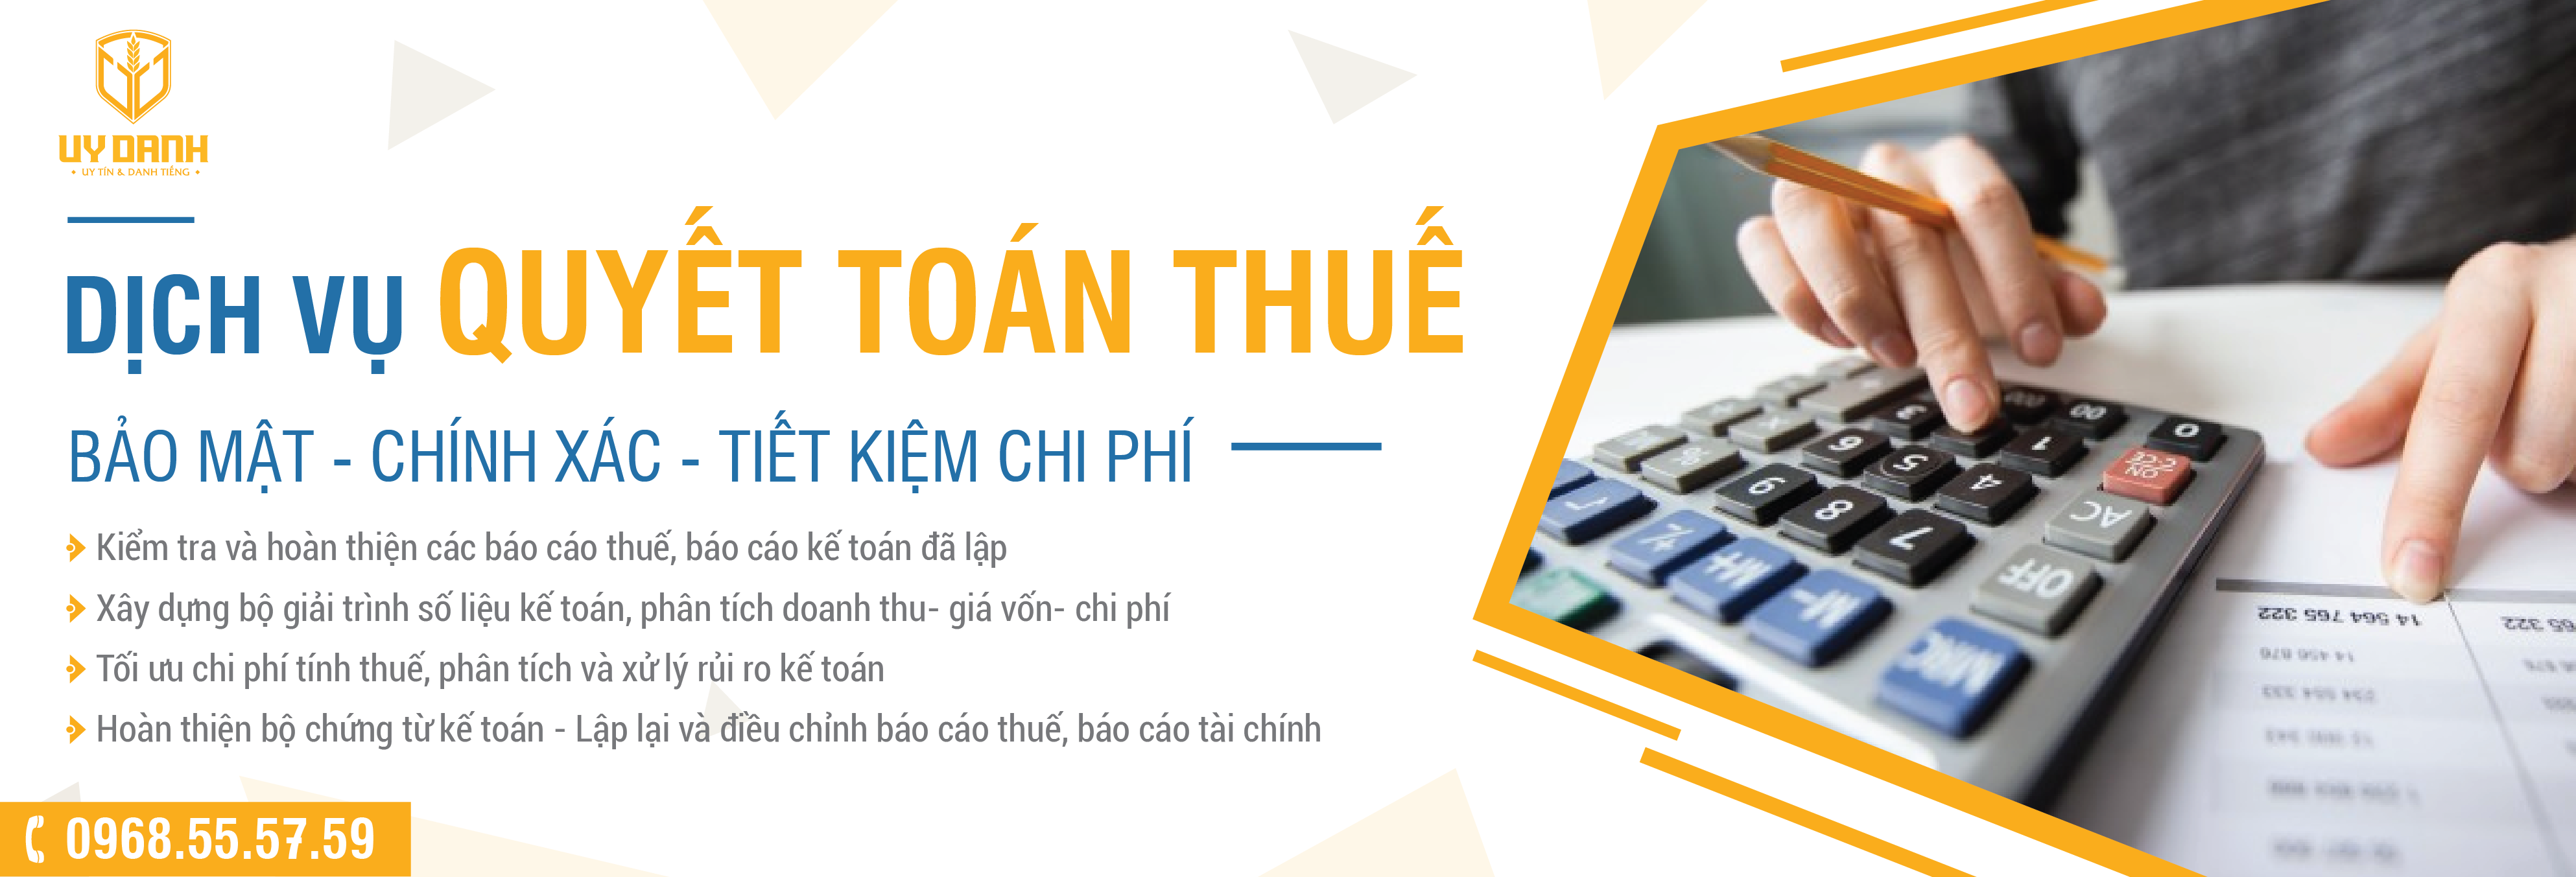 quyet-toan-thue